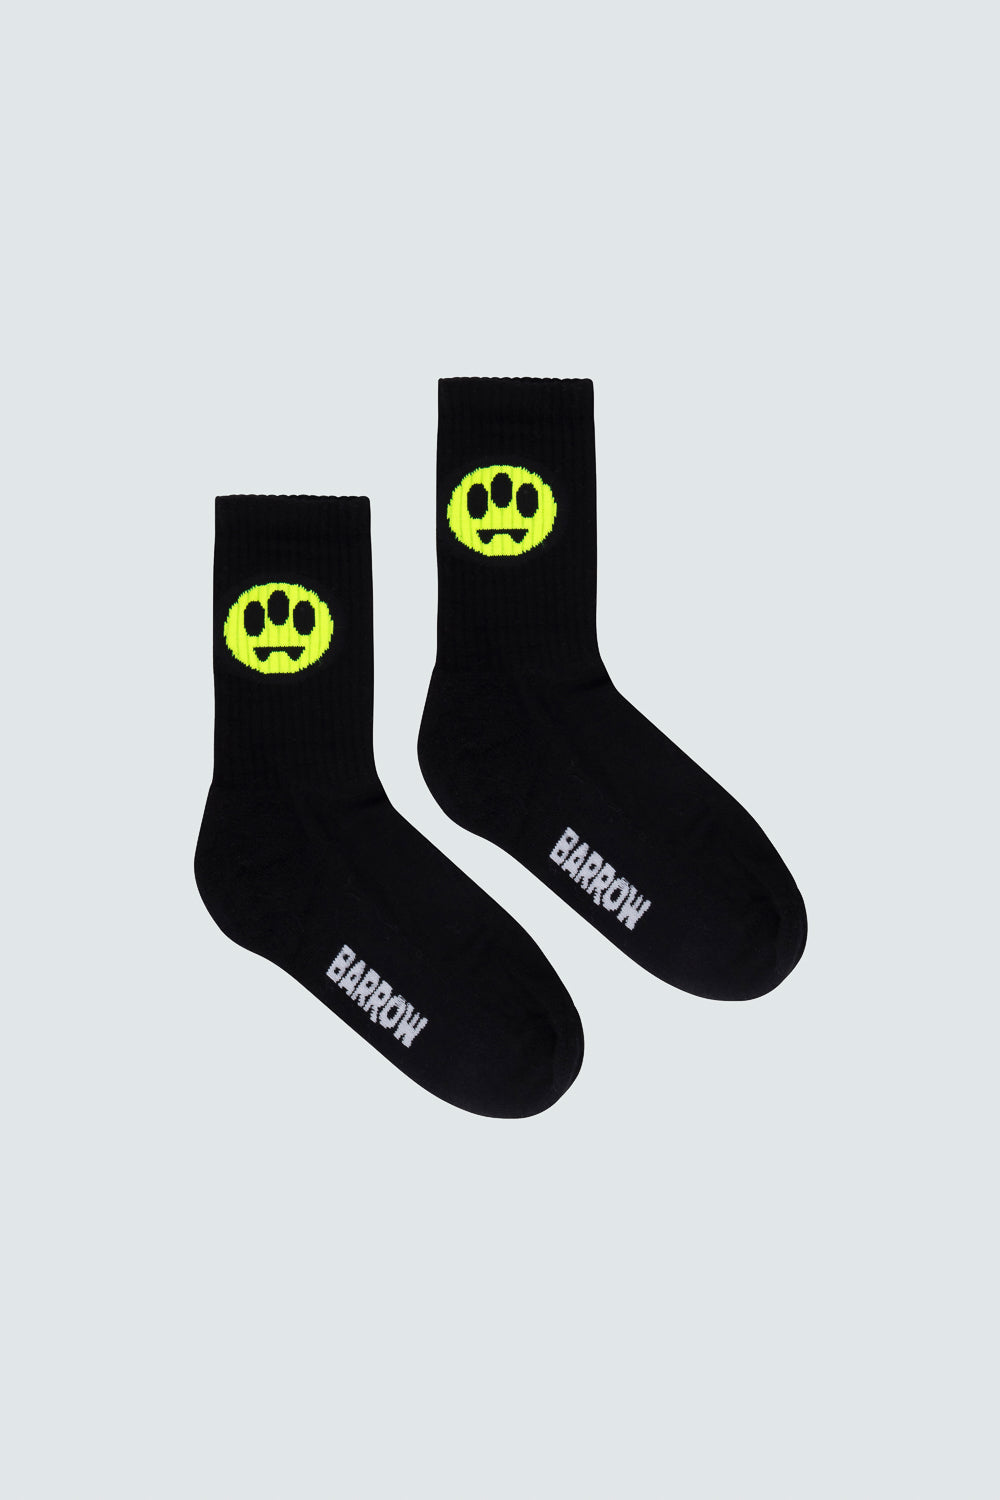 Buy the Barrow Socks in Black at Intro. Spend £50 for free UK delivery. Official stockists. We ship worldwide.